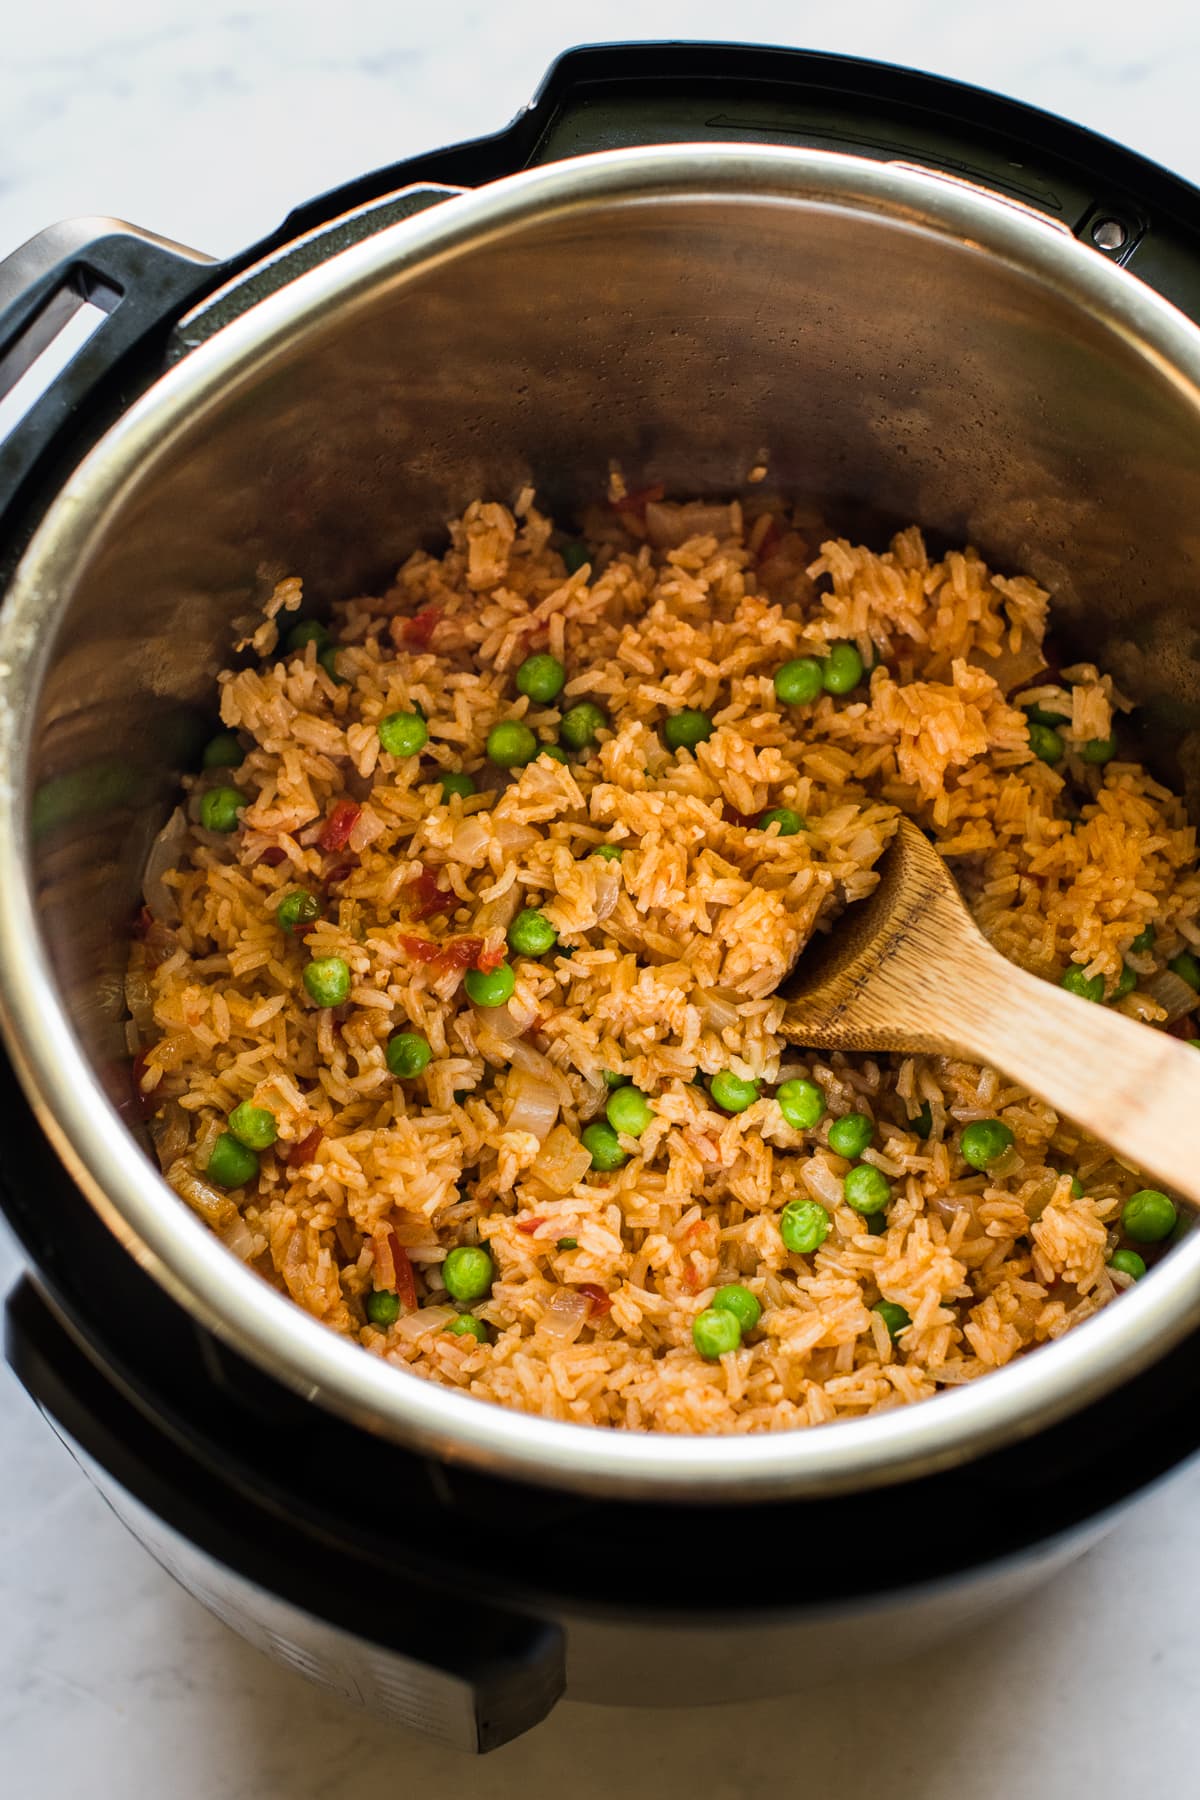 https://www.isabeleats.com/wp-content/uploads/2022/09/instant-pot-mexican-rice-small-6.jpg